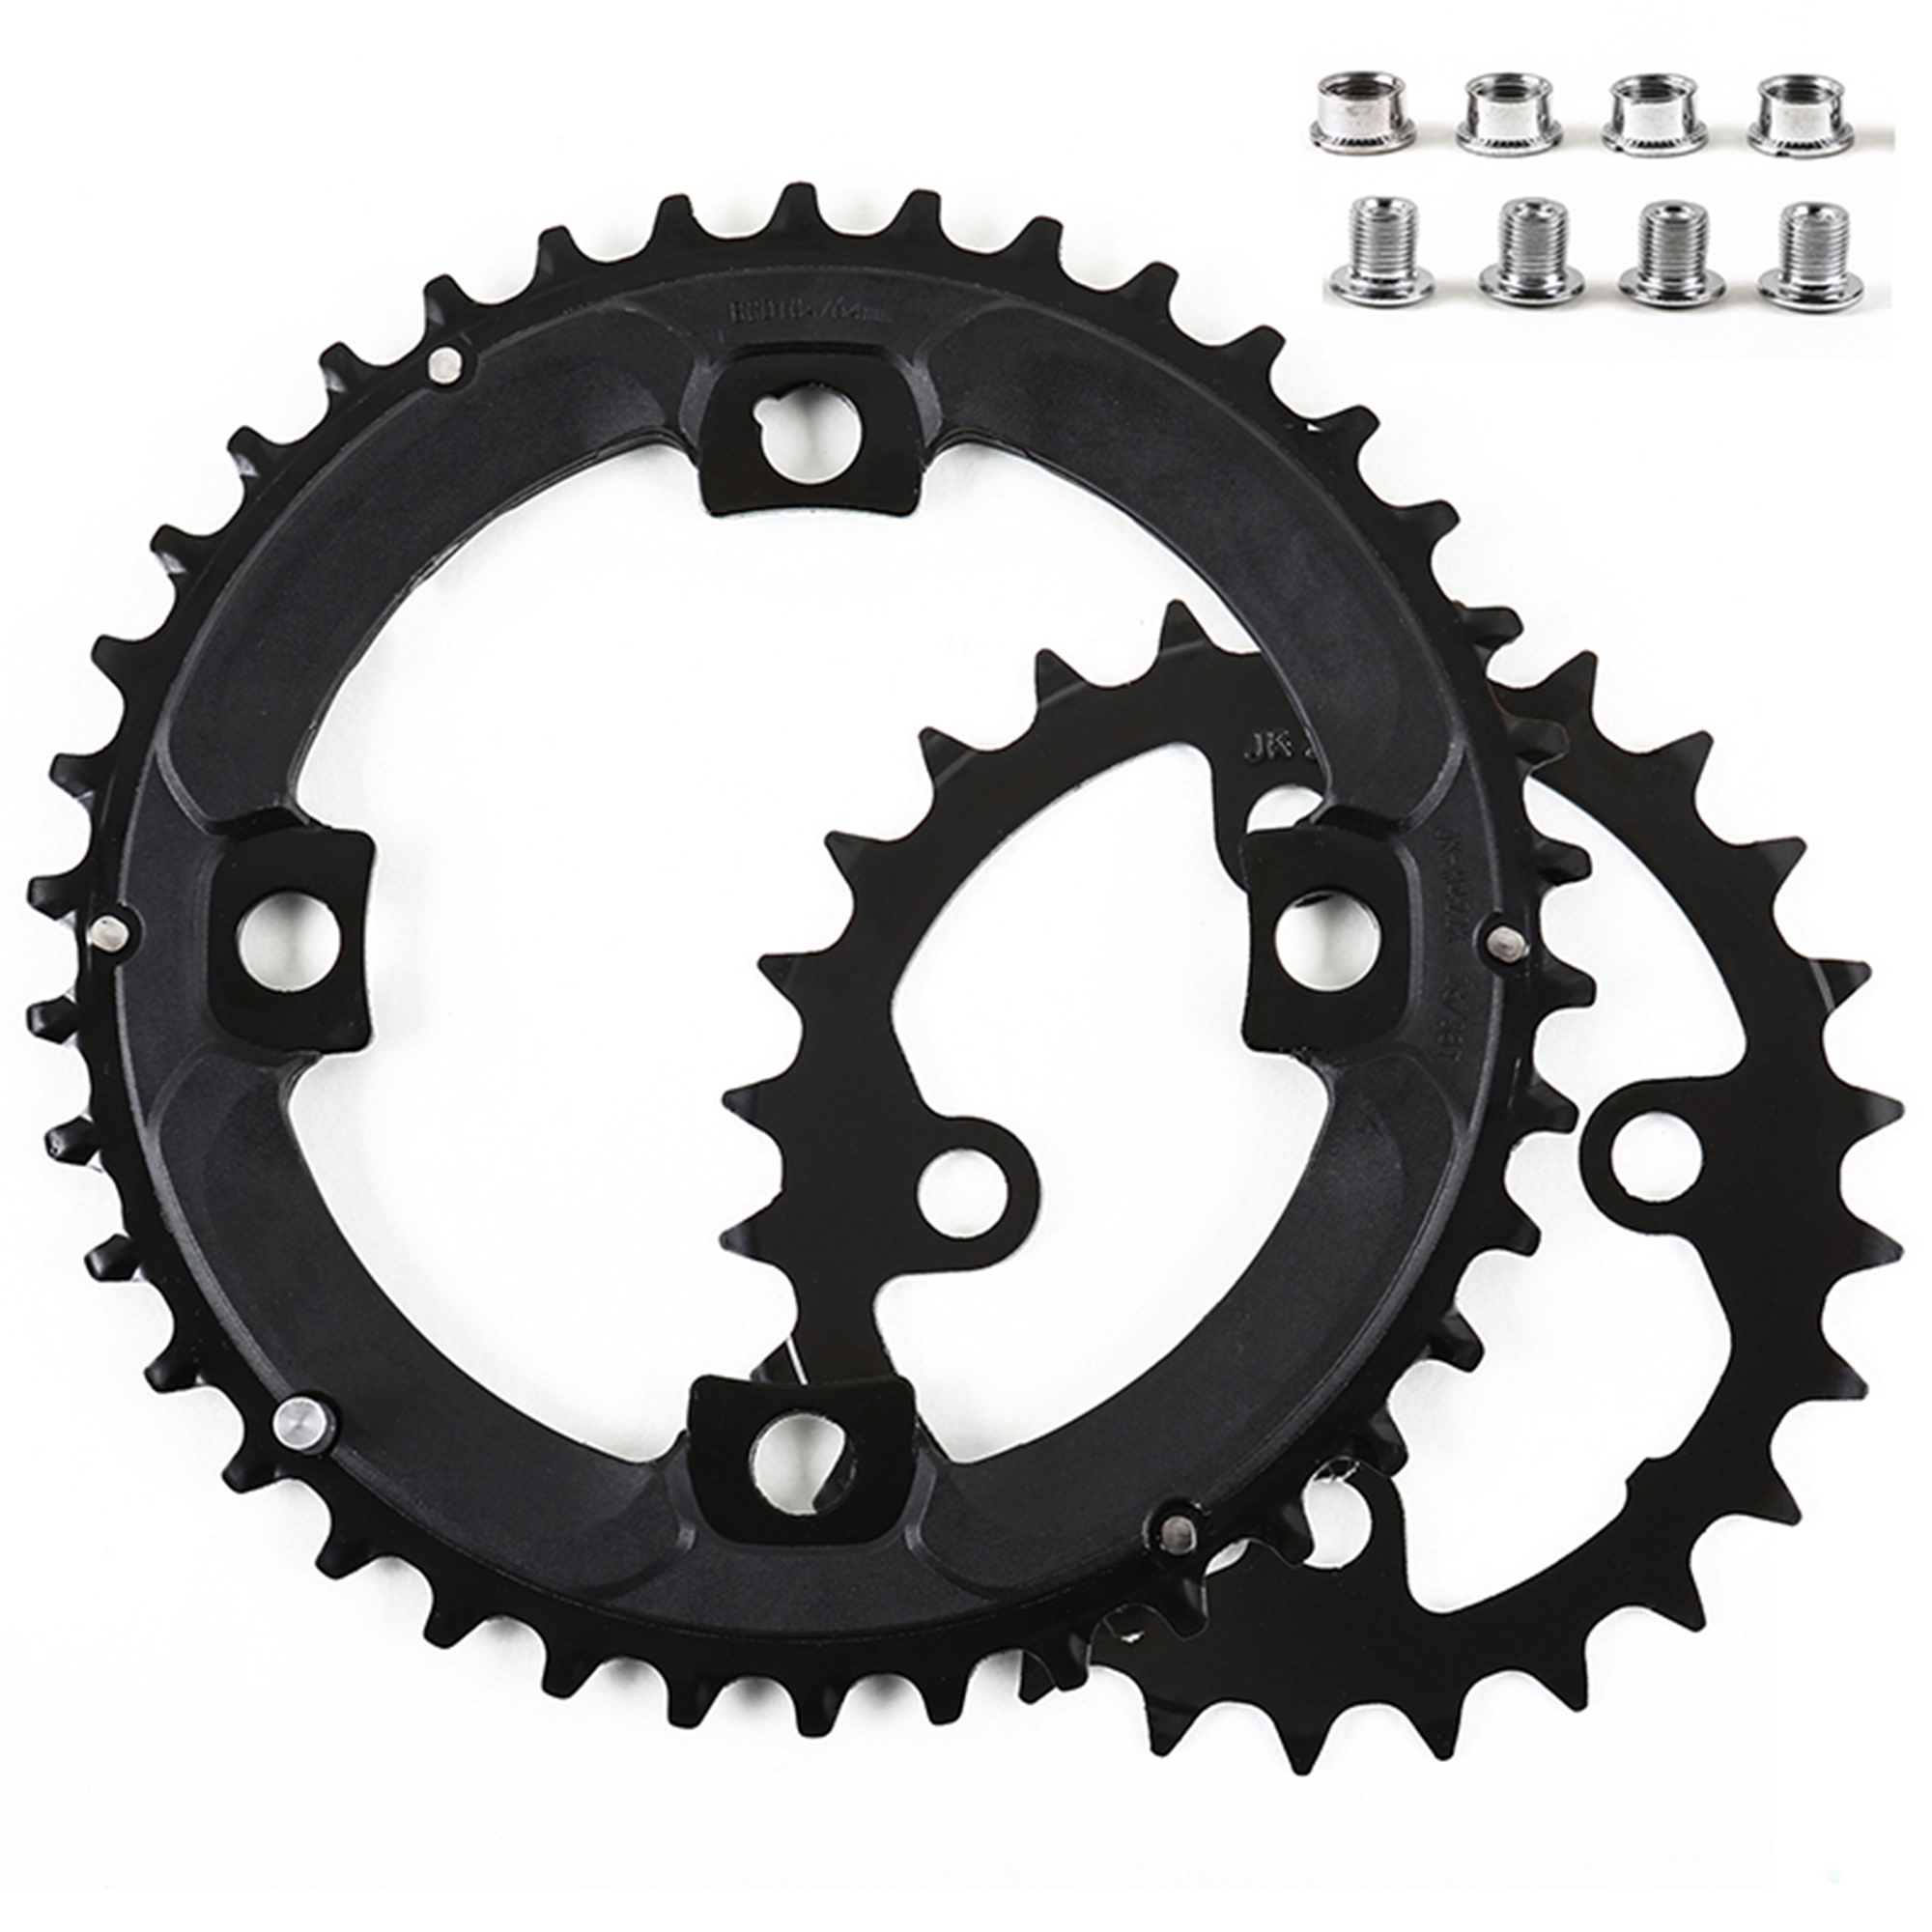 BUCKLOS 64/104 BCD Bike Chainring Set, Steel CNC Alloy Double/Triple MTB Chainring 22T 24T 26T 32T 38T 42T 44T 4 Bolts Mountain Bicycle Chainrings fit 8 9 10 Speed Compatible - image 1 of 5